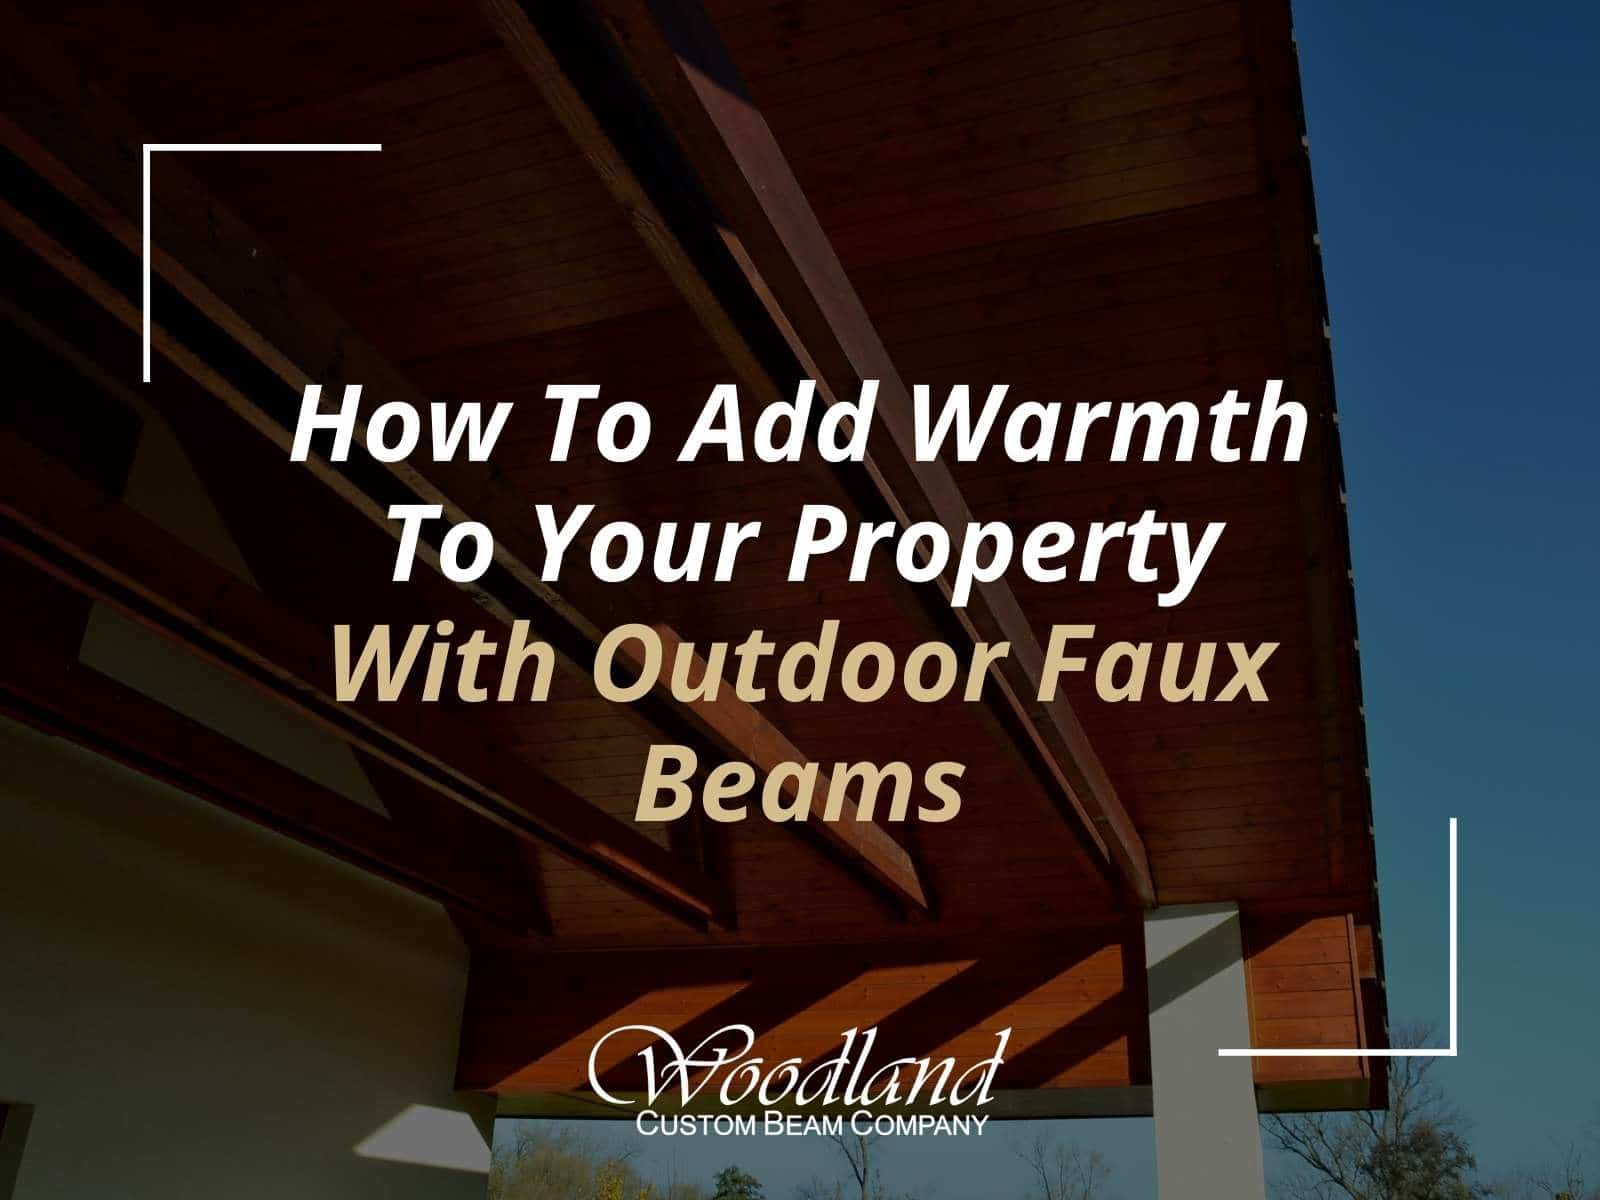 How To Add Warmth To Your Property With Outdoor Faux Beams